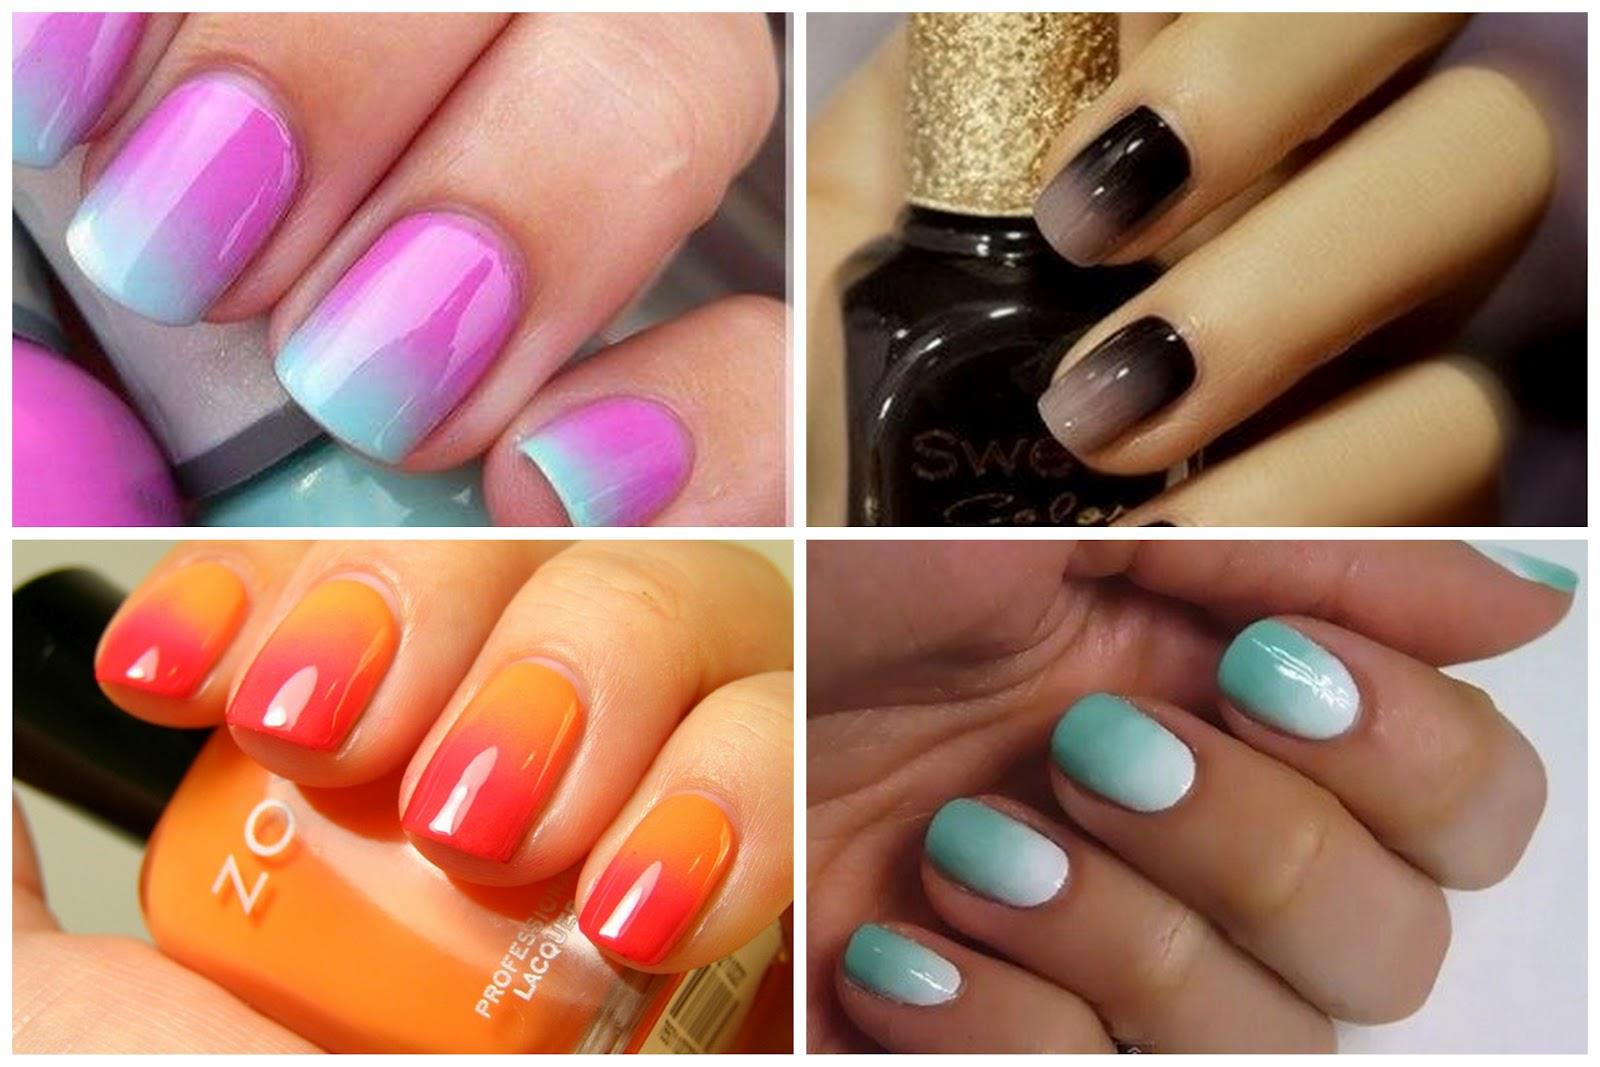 3. Bright Ombre Nails for Summer - wide 11